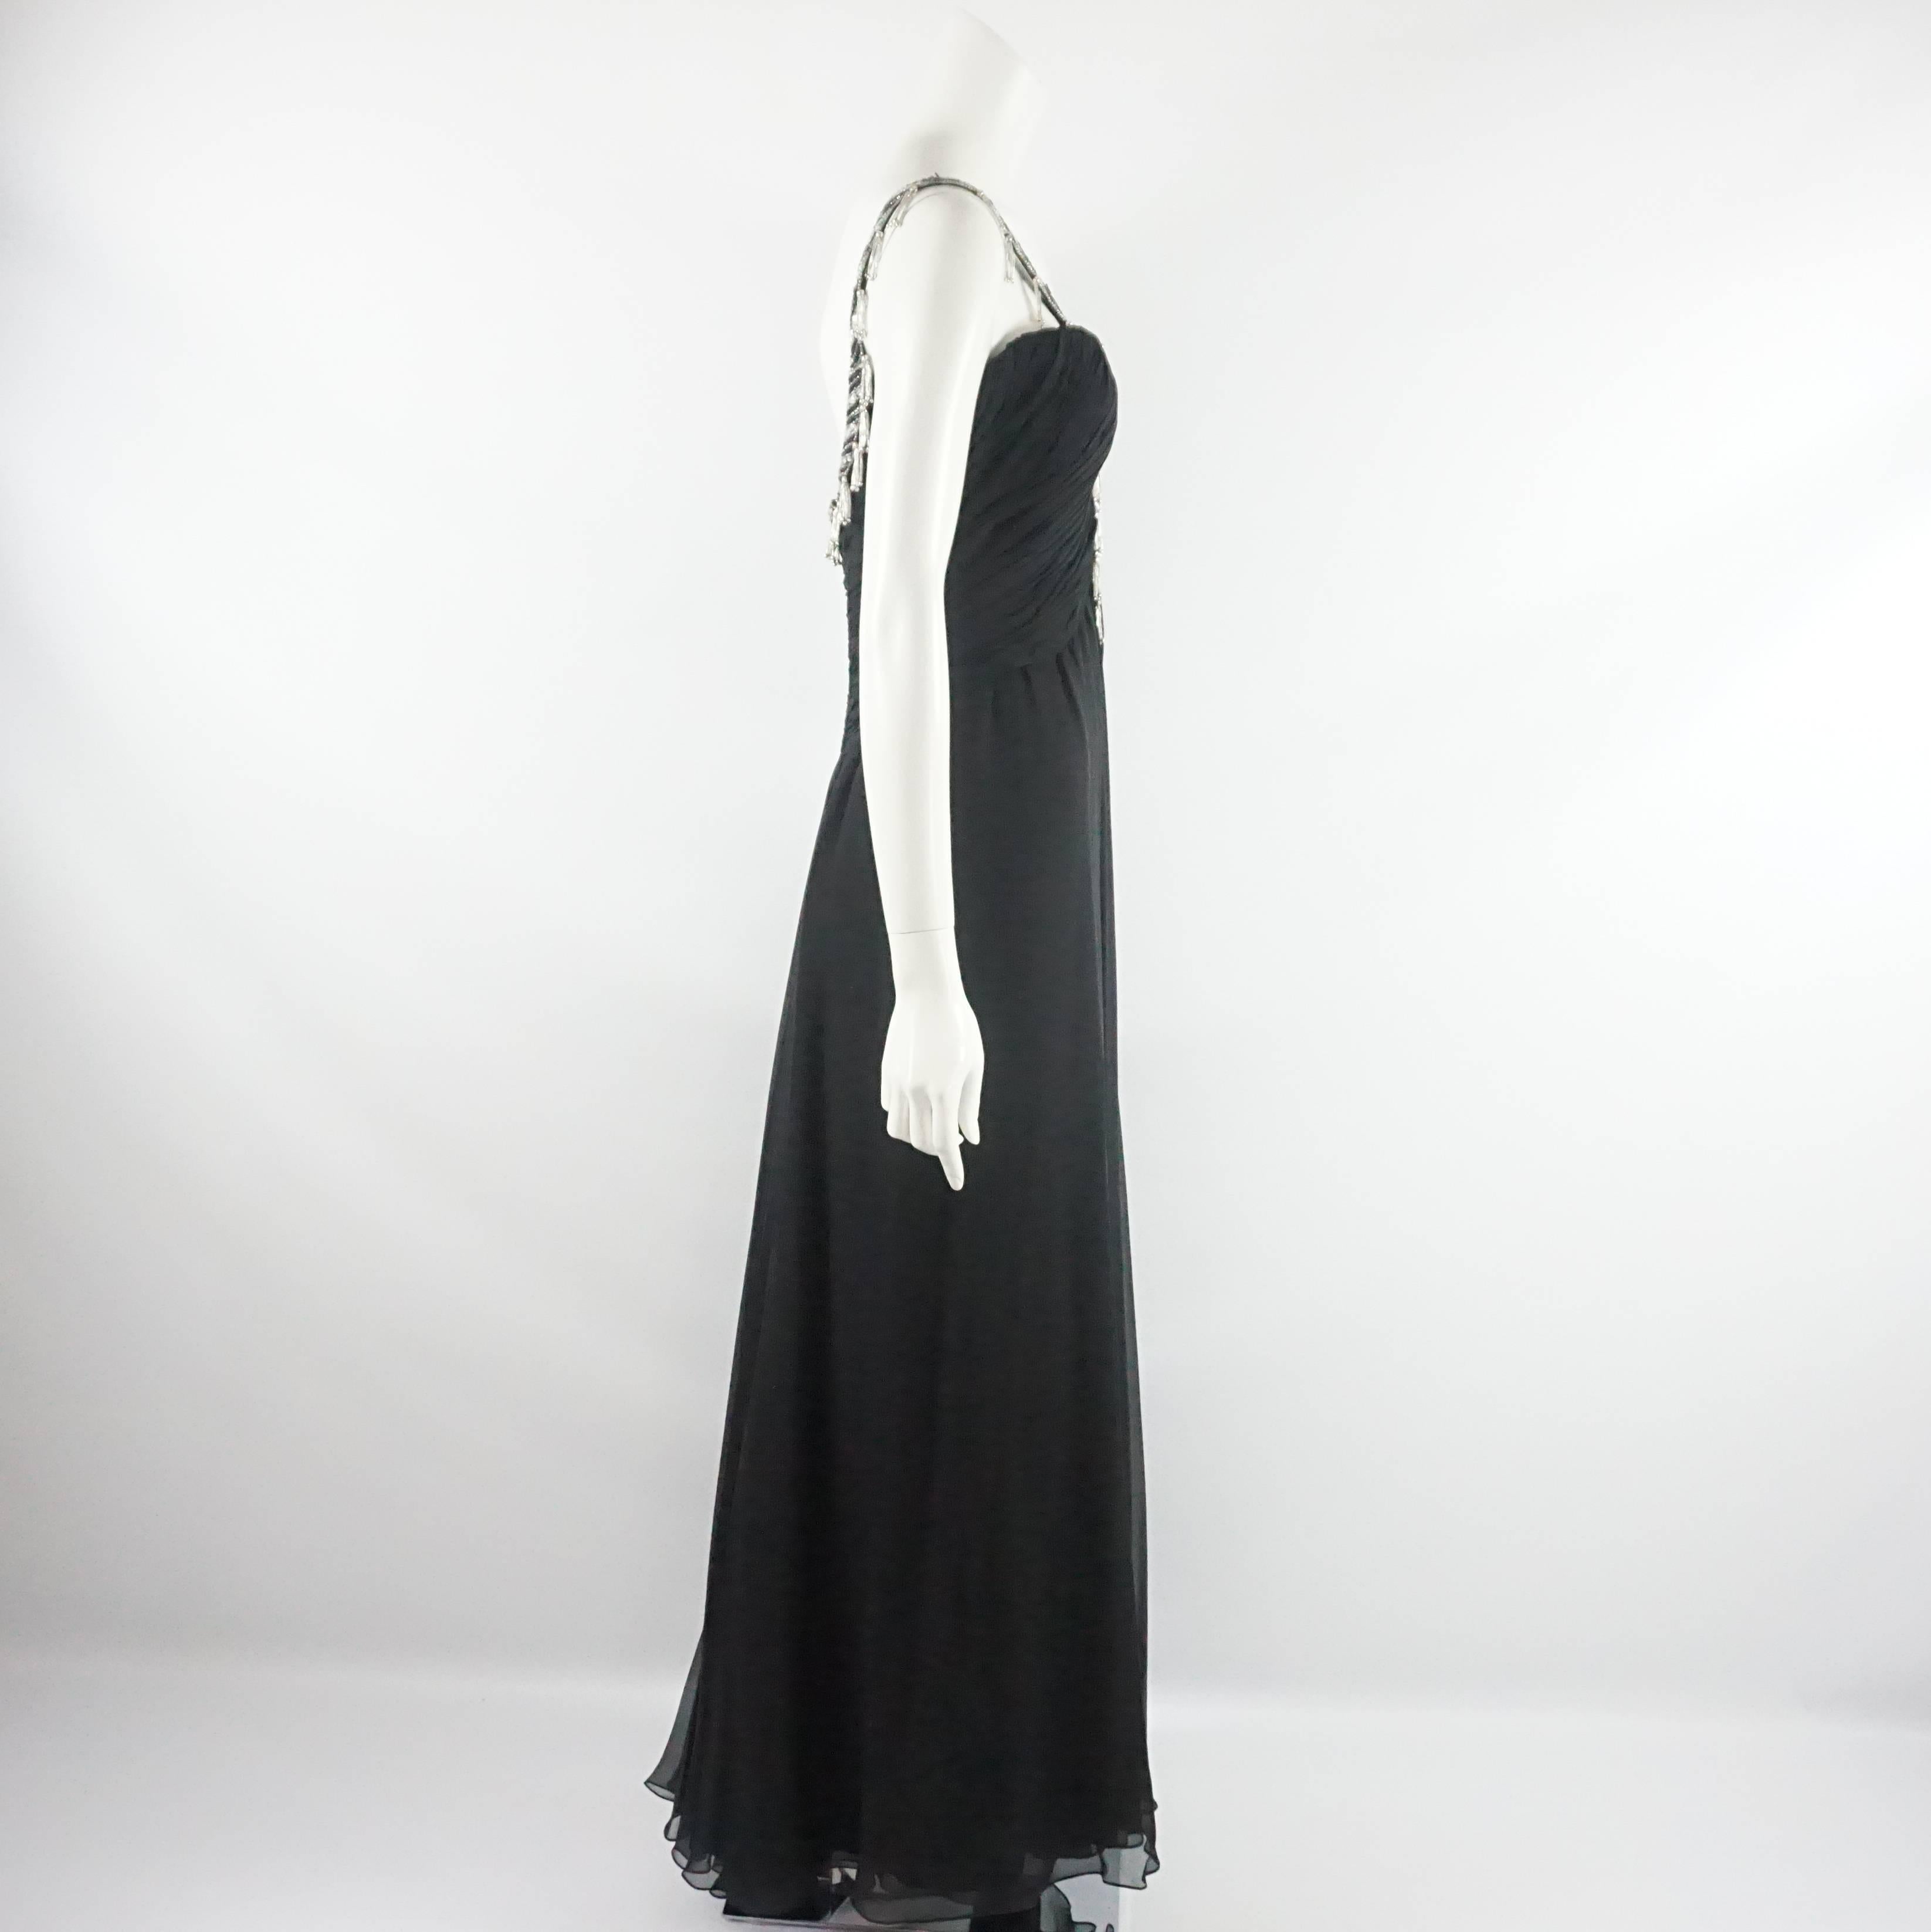 This vintage 1980's Bob Mackie gown is black silk chiffon. It has a halter and v-neck design with hanging beading and tassels. A shawl was made to go with the gown. These pieces are in excellent condition.

Gown Measurements
Bust: 32"
Waist: